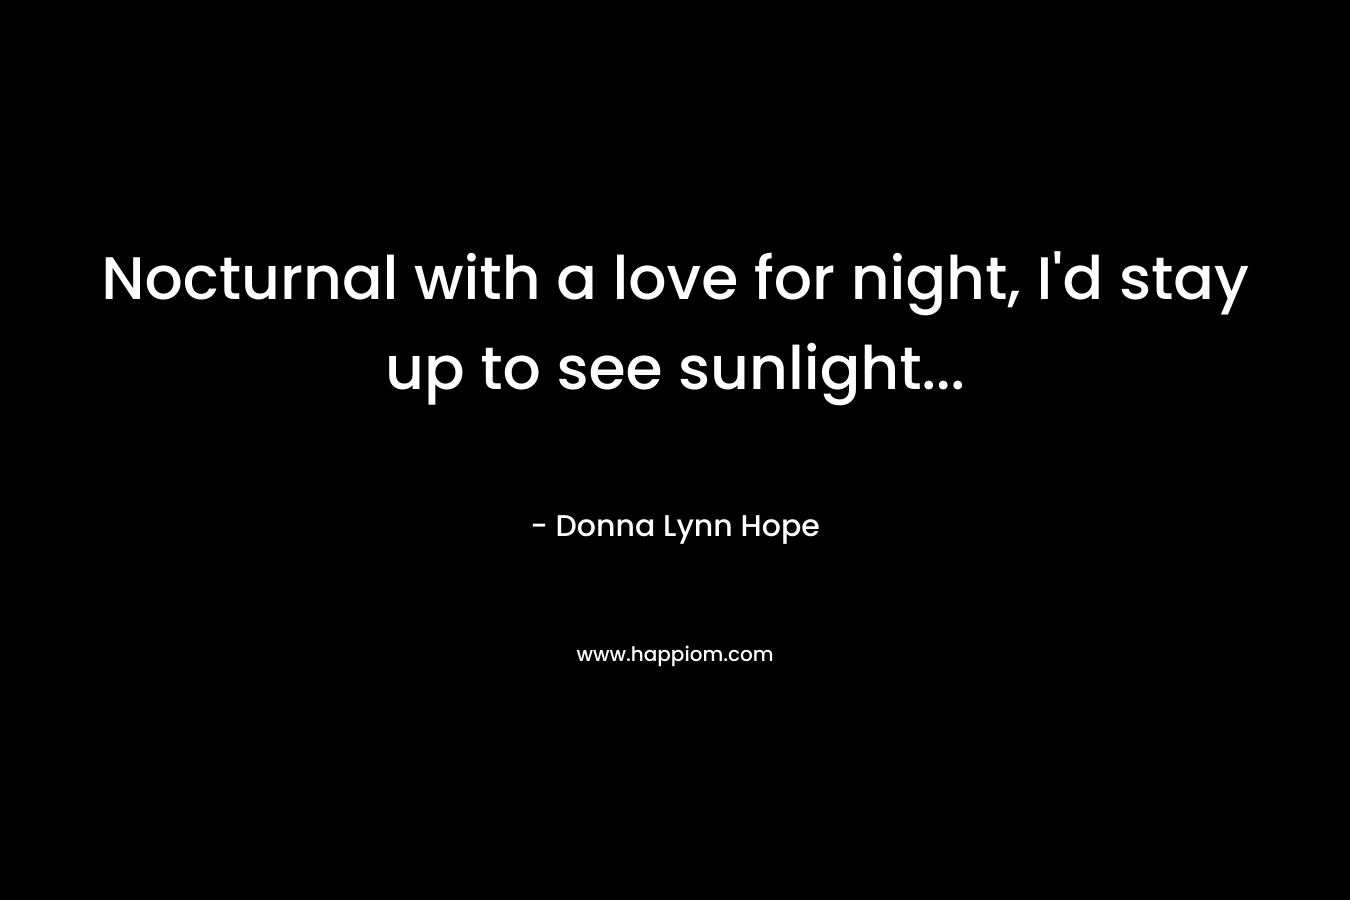 Nocturnal with a love for night, I’d stay up to see sunlight… – Donna Lynn Hope